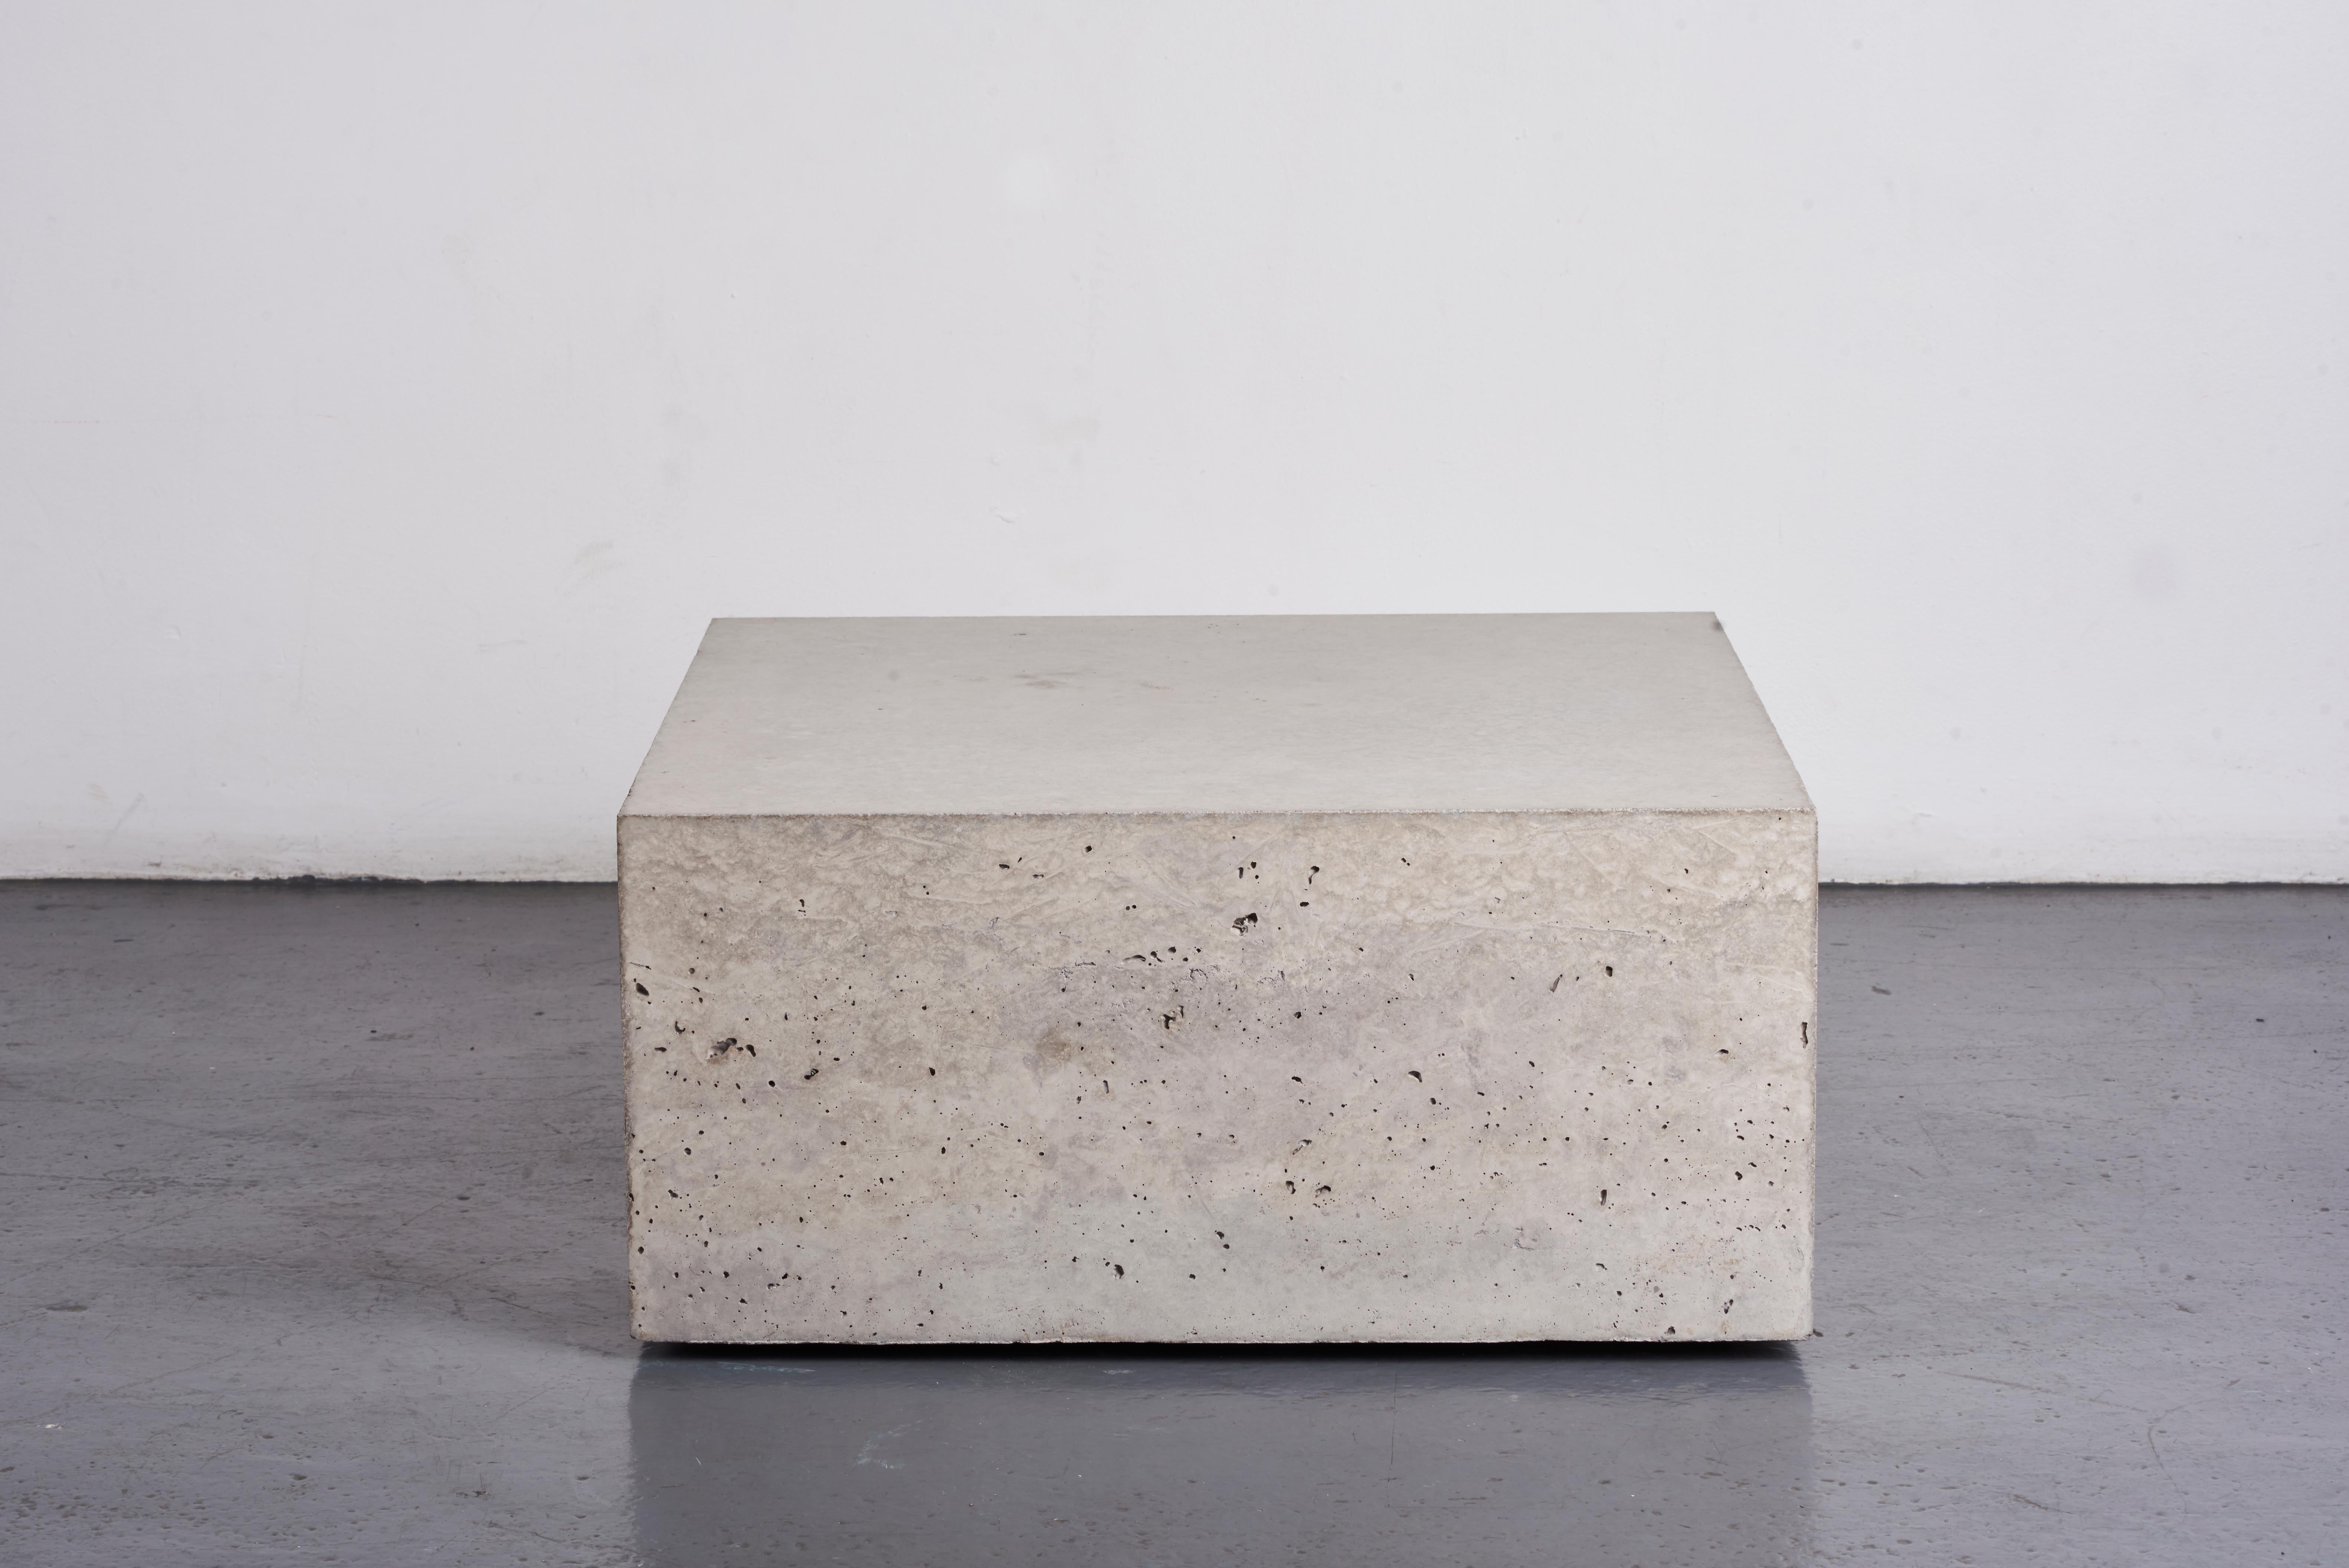 Scottish 'Ilha' Reinforced Concrete Table, One of a Kind Artwork by Littlewhitehead